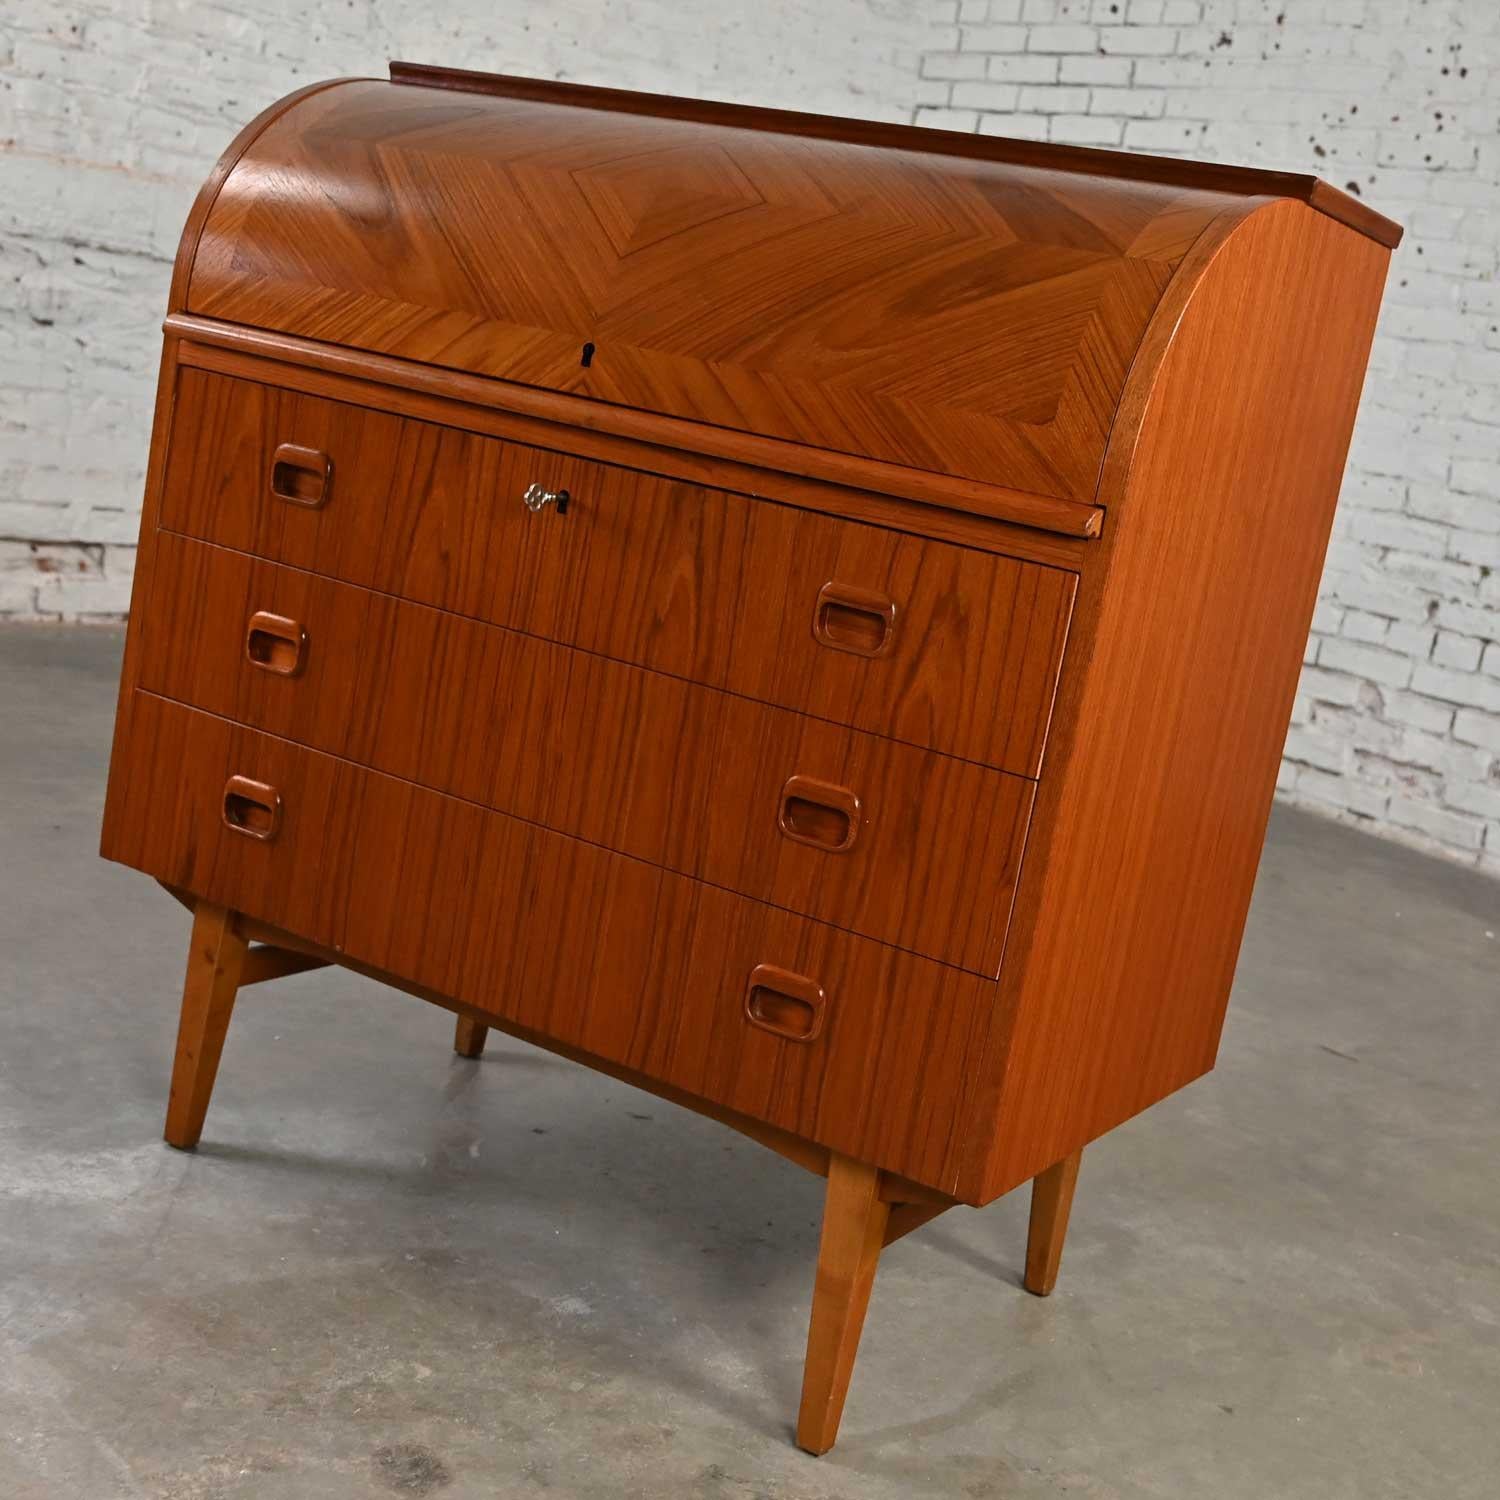 Gorgeous vintage Scandinavian Modern Svegards Markaryd teak roll top secretary desk or dresser with original key attributed to Egon Ostergaard. Beautiful condition, keeping in mind that this is vintage and not new so will have signs of use and wear.